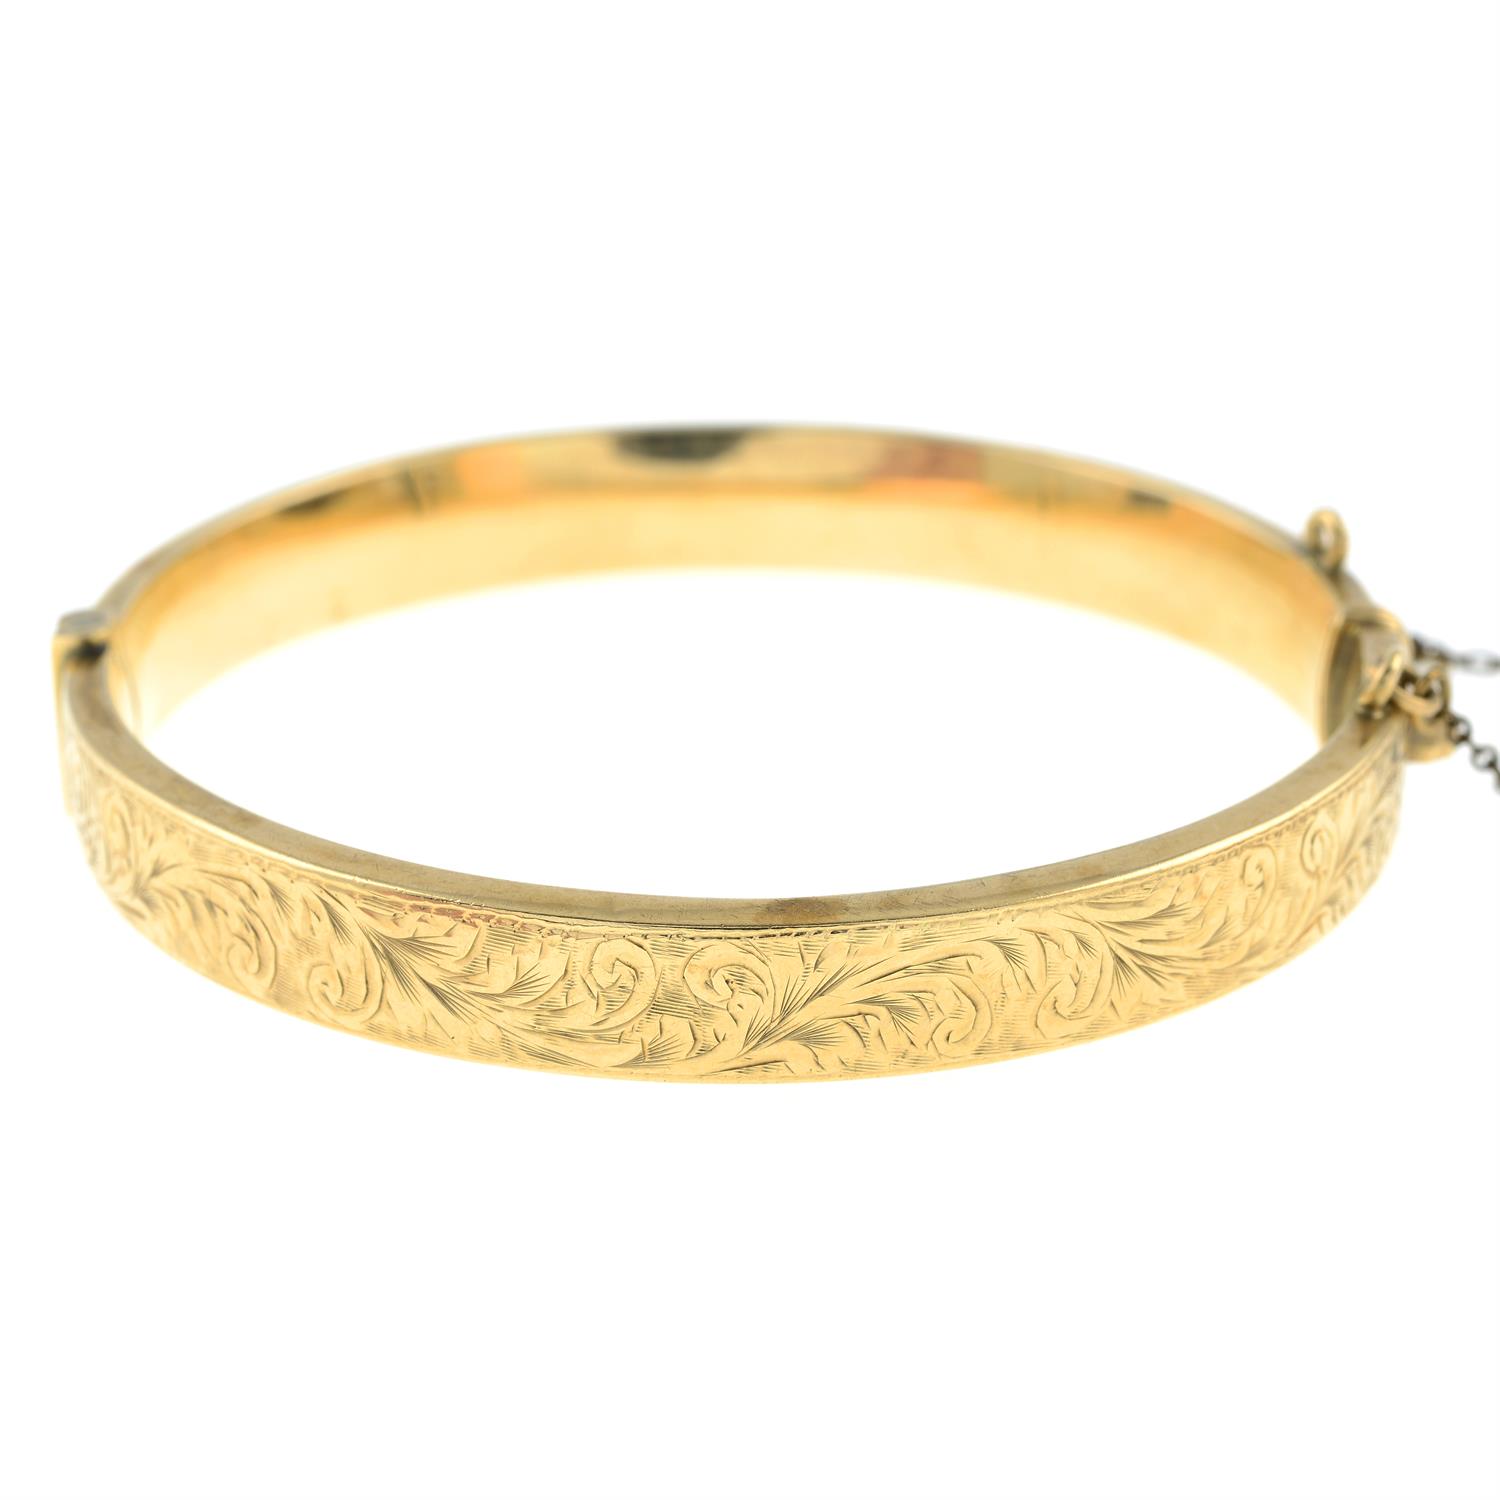 A 9ct gold scroll engrave hinged bangle, by Smith & Pepper.